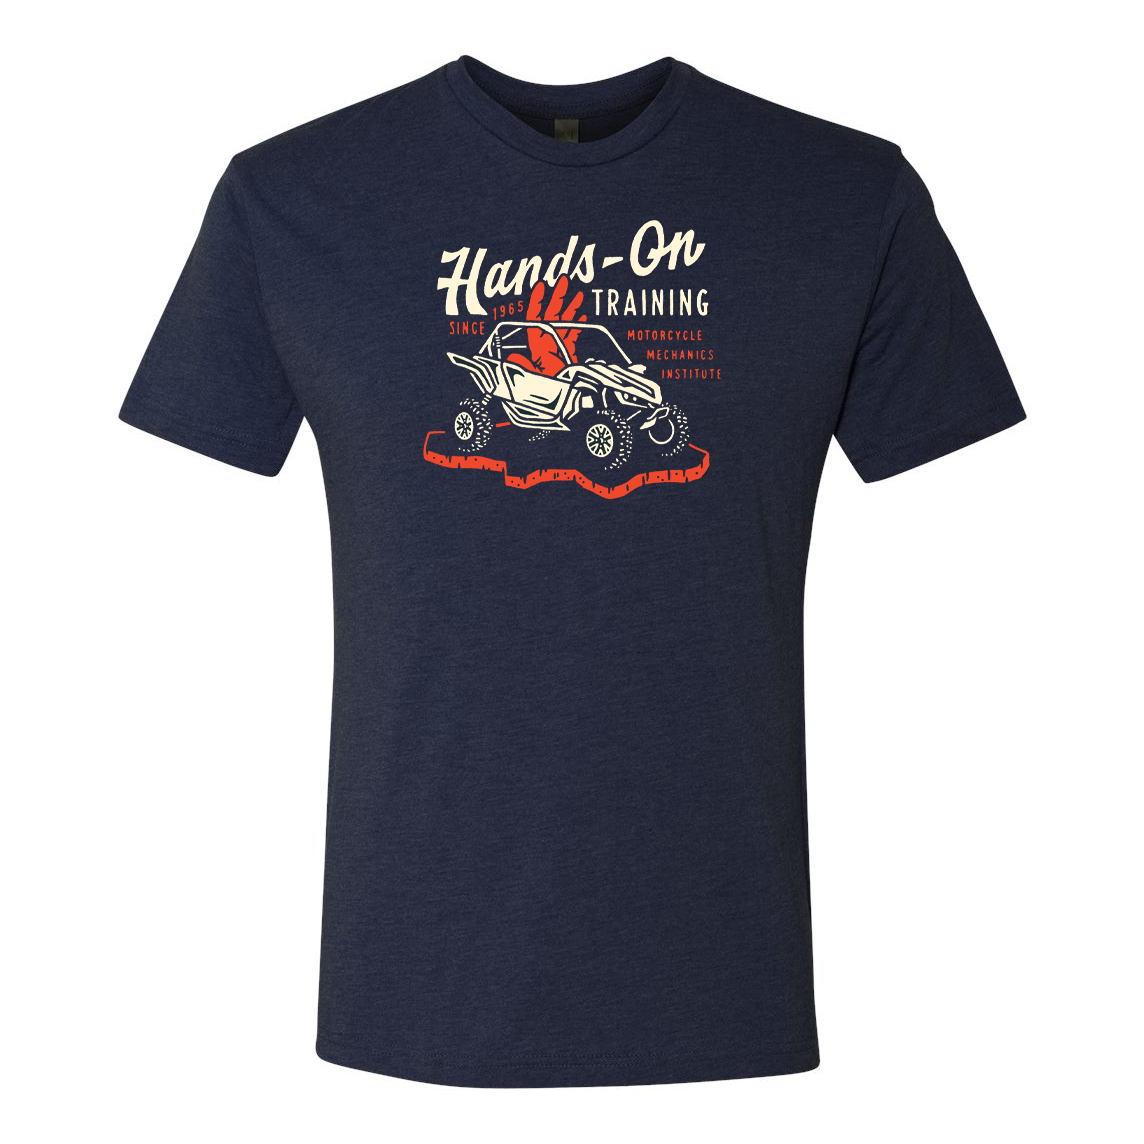 Hands-On Training Graphic T-Shirt